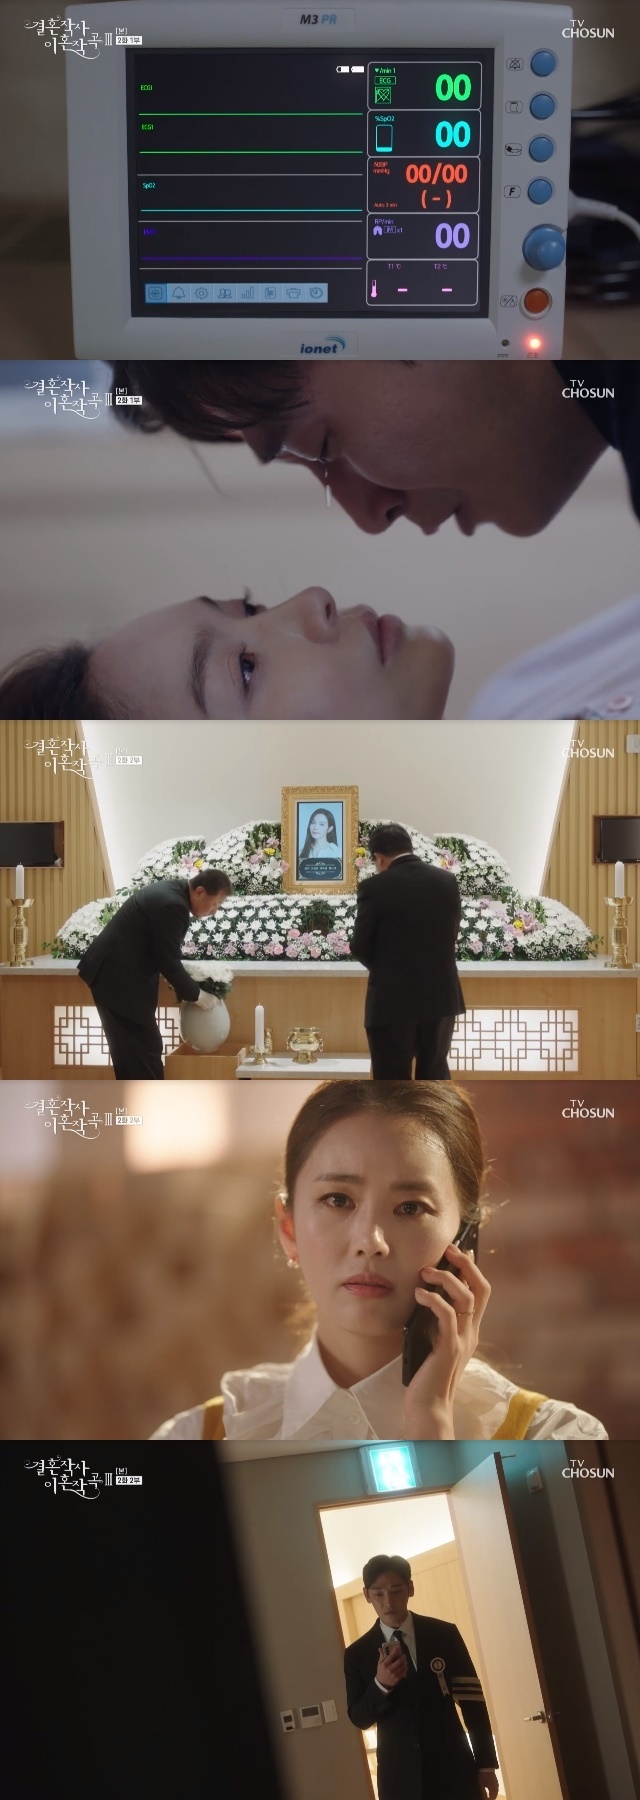 Lee Min-young shocked to death after giving birth to babyIn the second episode of TV Chosun Weekend Drama Divorce Composition 3 of Marriage Writing (Phoebe, Im Sung-han), directed by Oh Sang-hoon, which was broadcast on February 27, the dark cloud was in the house of the family, which seemed to be happy in the future.Song Won (Lee Min-young), who held the baby in his arms on the day, confirmed that the baby was normal with both fingers and toes like any other mother, and said, Are you having a hard time?But the joy was also a moment. Song Won suddenly did not breathe properly and the ECG sounded a warning.The medical staff tried to remove the baby from Songwon for proper treatment, and Songwon tried to keep the baby from being taken somehow.But eventually the baby was taken out of Songwons arms and the beep sound sounded in the ECG, and even with CPR, Songwon died without returning.The Panganese family members who cheered when they heard that the sex of the born baby was a son soon heard Songwons bibo.Judge Hyun headed to Songwon as if he could not believe it, and faced Songwon who died without even detecting his eyes.Judge Hyun refused to move Songwon to the morgue and cried out by Songwon.The Panganese family uploaded Songwons The Funeral, and the news that Pangane was awarded was heard by Bu Hye-ryong (for example).The friend of the vice-minister accidentally witnessed the judge who is guarding the Funeral chapter as a resident.However, he did not know that the main character of The Funeral was Songwon, and he called the judge to ask if his parents had died at the end of Friends statement that the award was like a family award.In the trailer, the unwaveringly shameless judge-hyun family was drawn.Judge Hyuns father, Panmunho (Kim Eung-soo), asked So Ye-jung (Lee Jong-nam) if Hye-ryong is not better than others, and So Ye-jung replied, What is it that Hye-ryong is sorry for me to think about joining with Sahyeon again?It was an unsettling idea to put the vice-president who was angry and divorced by the affair of the judge and the secret Songwon of the parents-in-law back into the house.Meanwhile, Safi-young (Park Joo-mi)s house was in a hurry due to the disturbance of her daughter Jia (Park Seo-kyung).Shin Ki-rim (played by Roh Joo-hyun), who was hovering around his family, grabbed Kim Dong-mi (played by Lee Hye-sook) by holding her head and appealed for her injustice about her death.Jia woke up again, but Safi Young began to worry seriously, looking back on Jias dream of her grandfather Shin Ki-rim.In addition, Seoban (Moon Sung-ho) went straight as soon as he learned that Lee Si-eun (Jeon Soo-kyung) had divorced.The West half revealed to Lee Si-eun that he had been watching alone for a while while he was an elementary school student.The West Ban suggested that he should eat rice together with his children, Park Hyang-ki (Jeon Hye-won), and Park Woo-ram (Lim Han-bin), on his birthday two days later, saying, What he does not know about Ishieun is mind.The West half is mannered, but it shook the heart of Lee Si-eun.